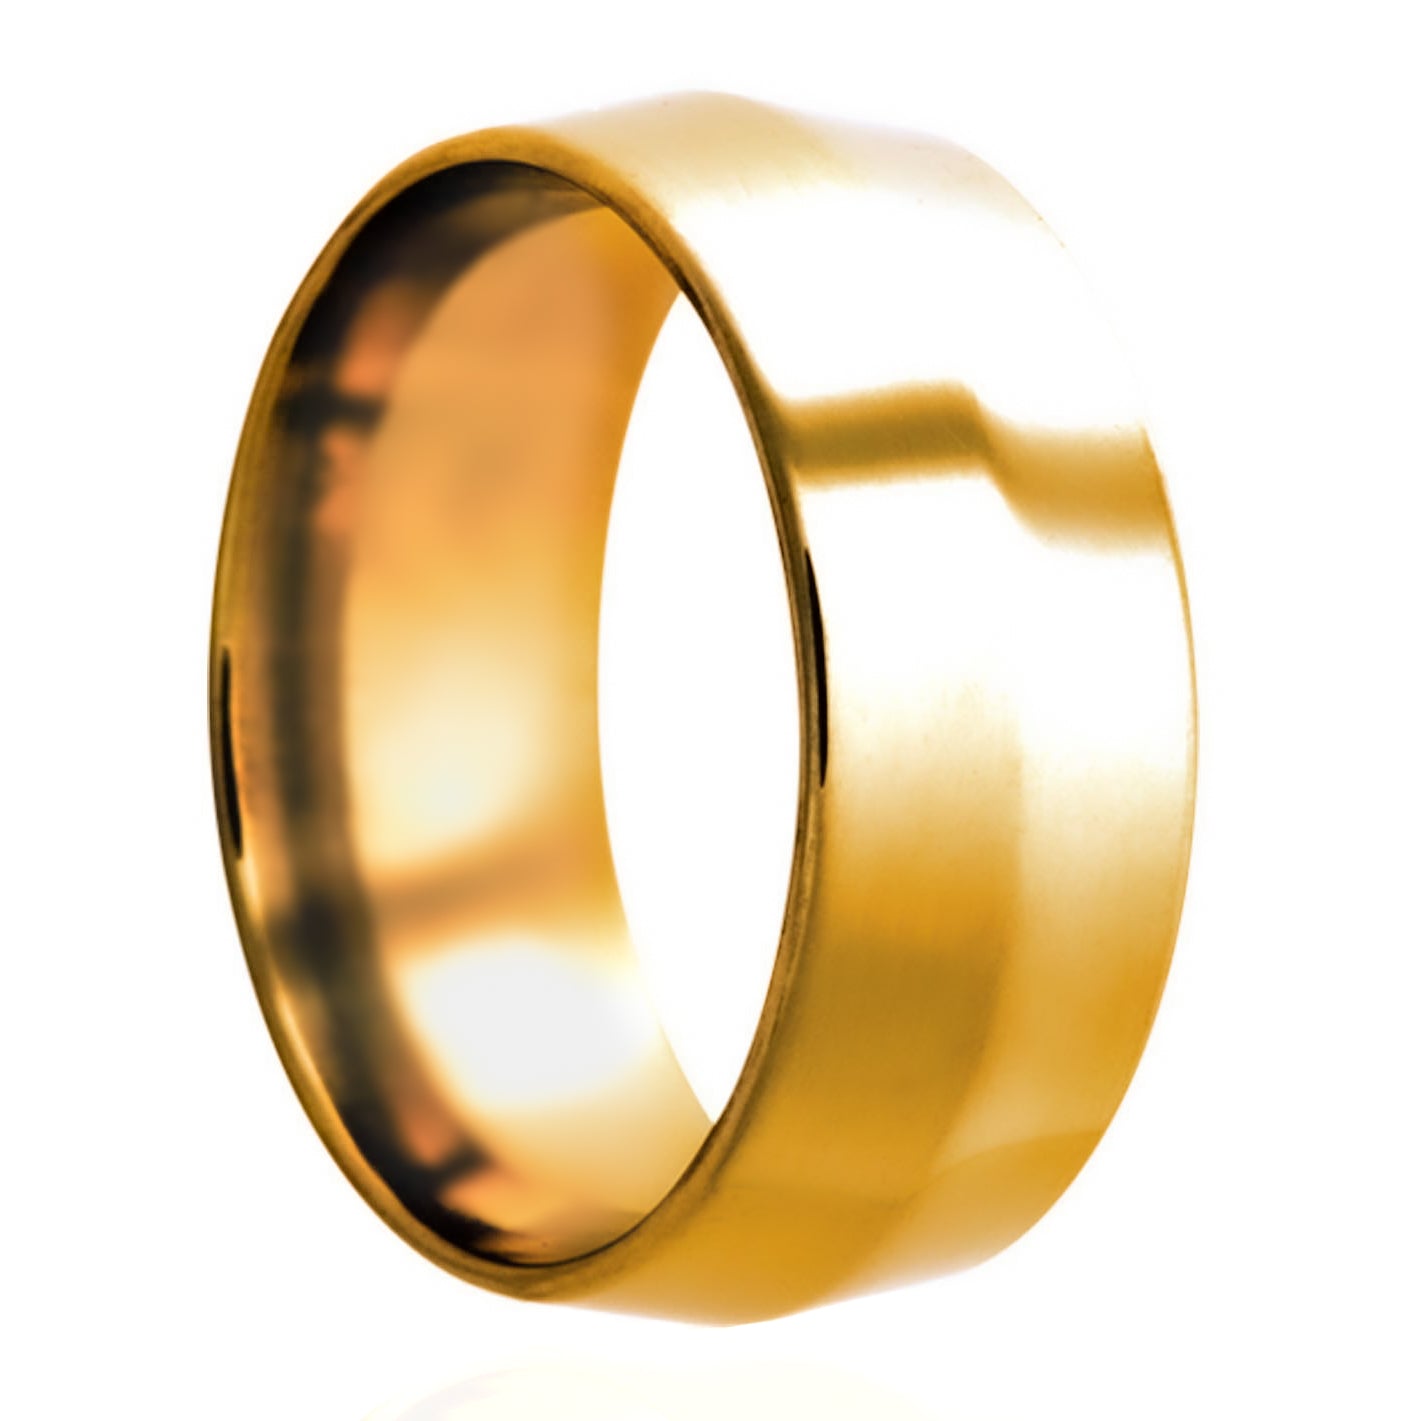 A 14k gold knife edge wedding band displayed on a neutral white background.